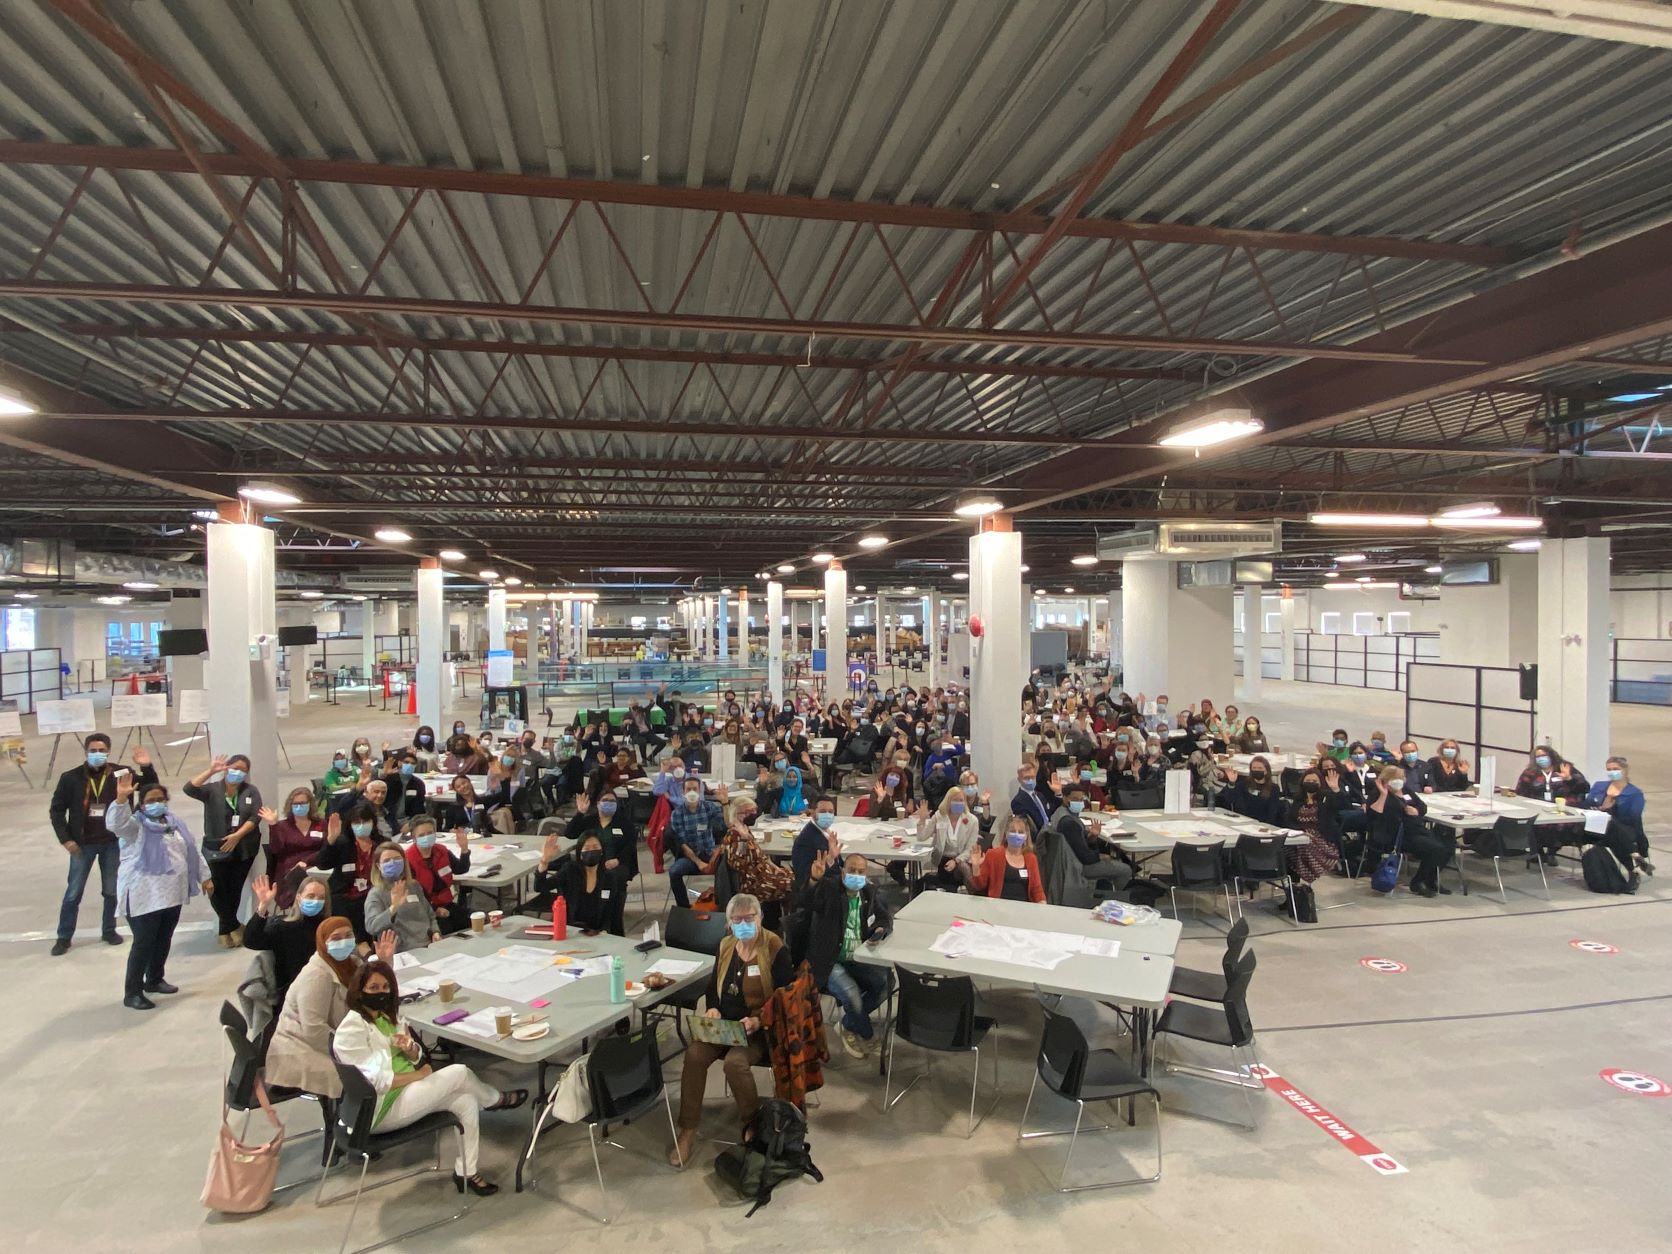 Featured image for “ETHP welcomes 130-plus members in Thorncliffe Park for first in-person planning session since February 2020”